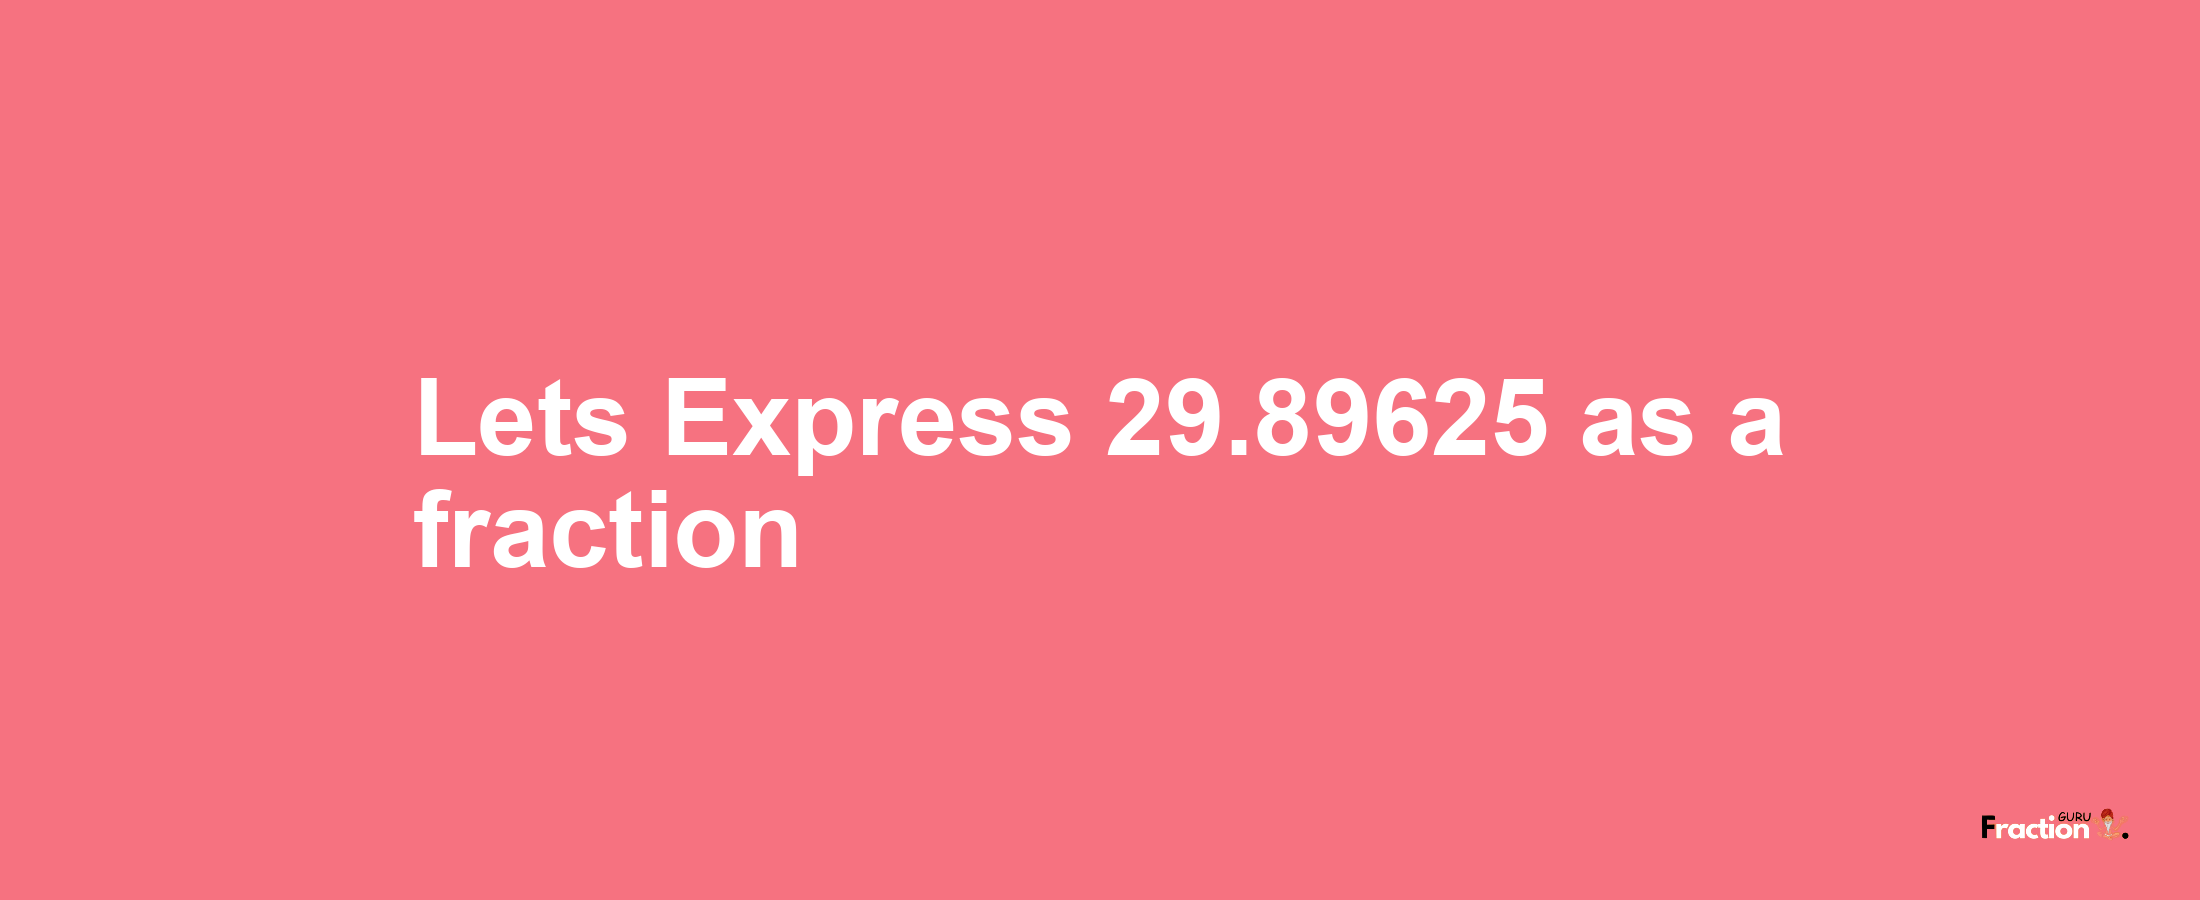 Lets Express 29.89625 as afraction